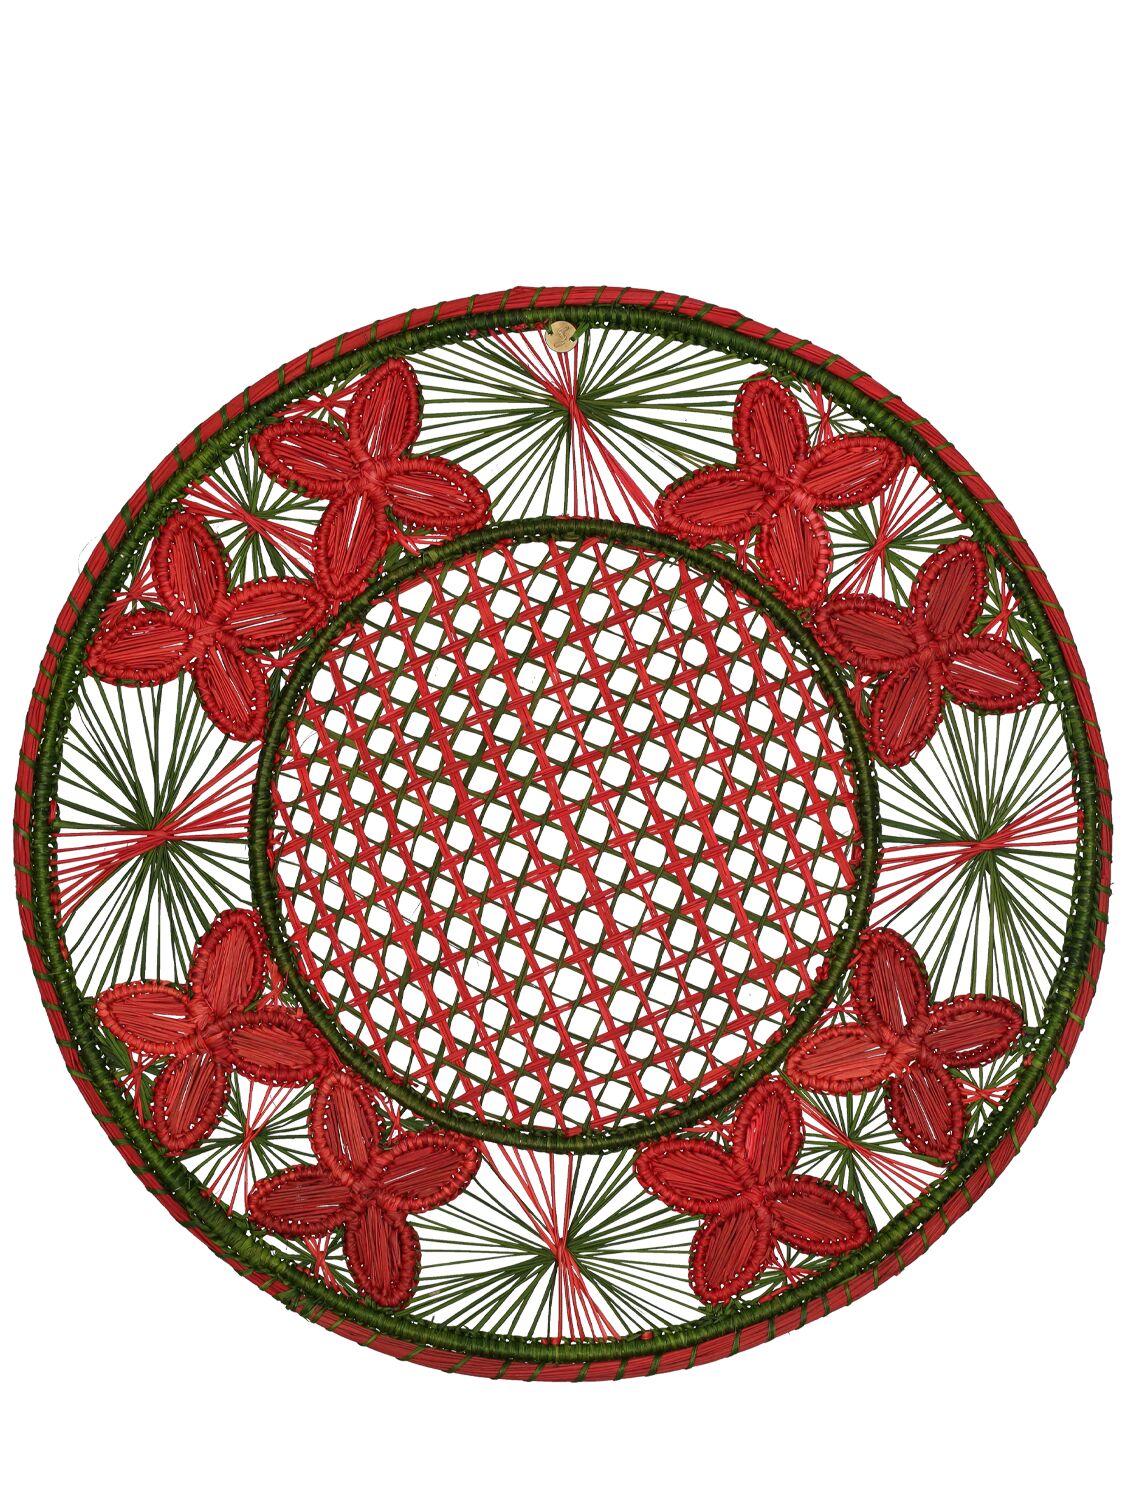 Cabana Louloudi Woven Placemat In Red